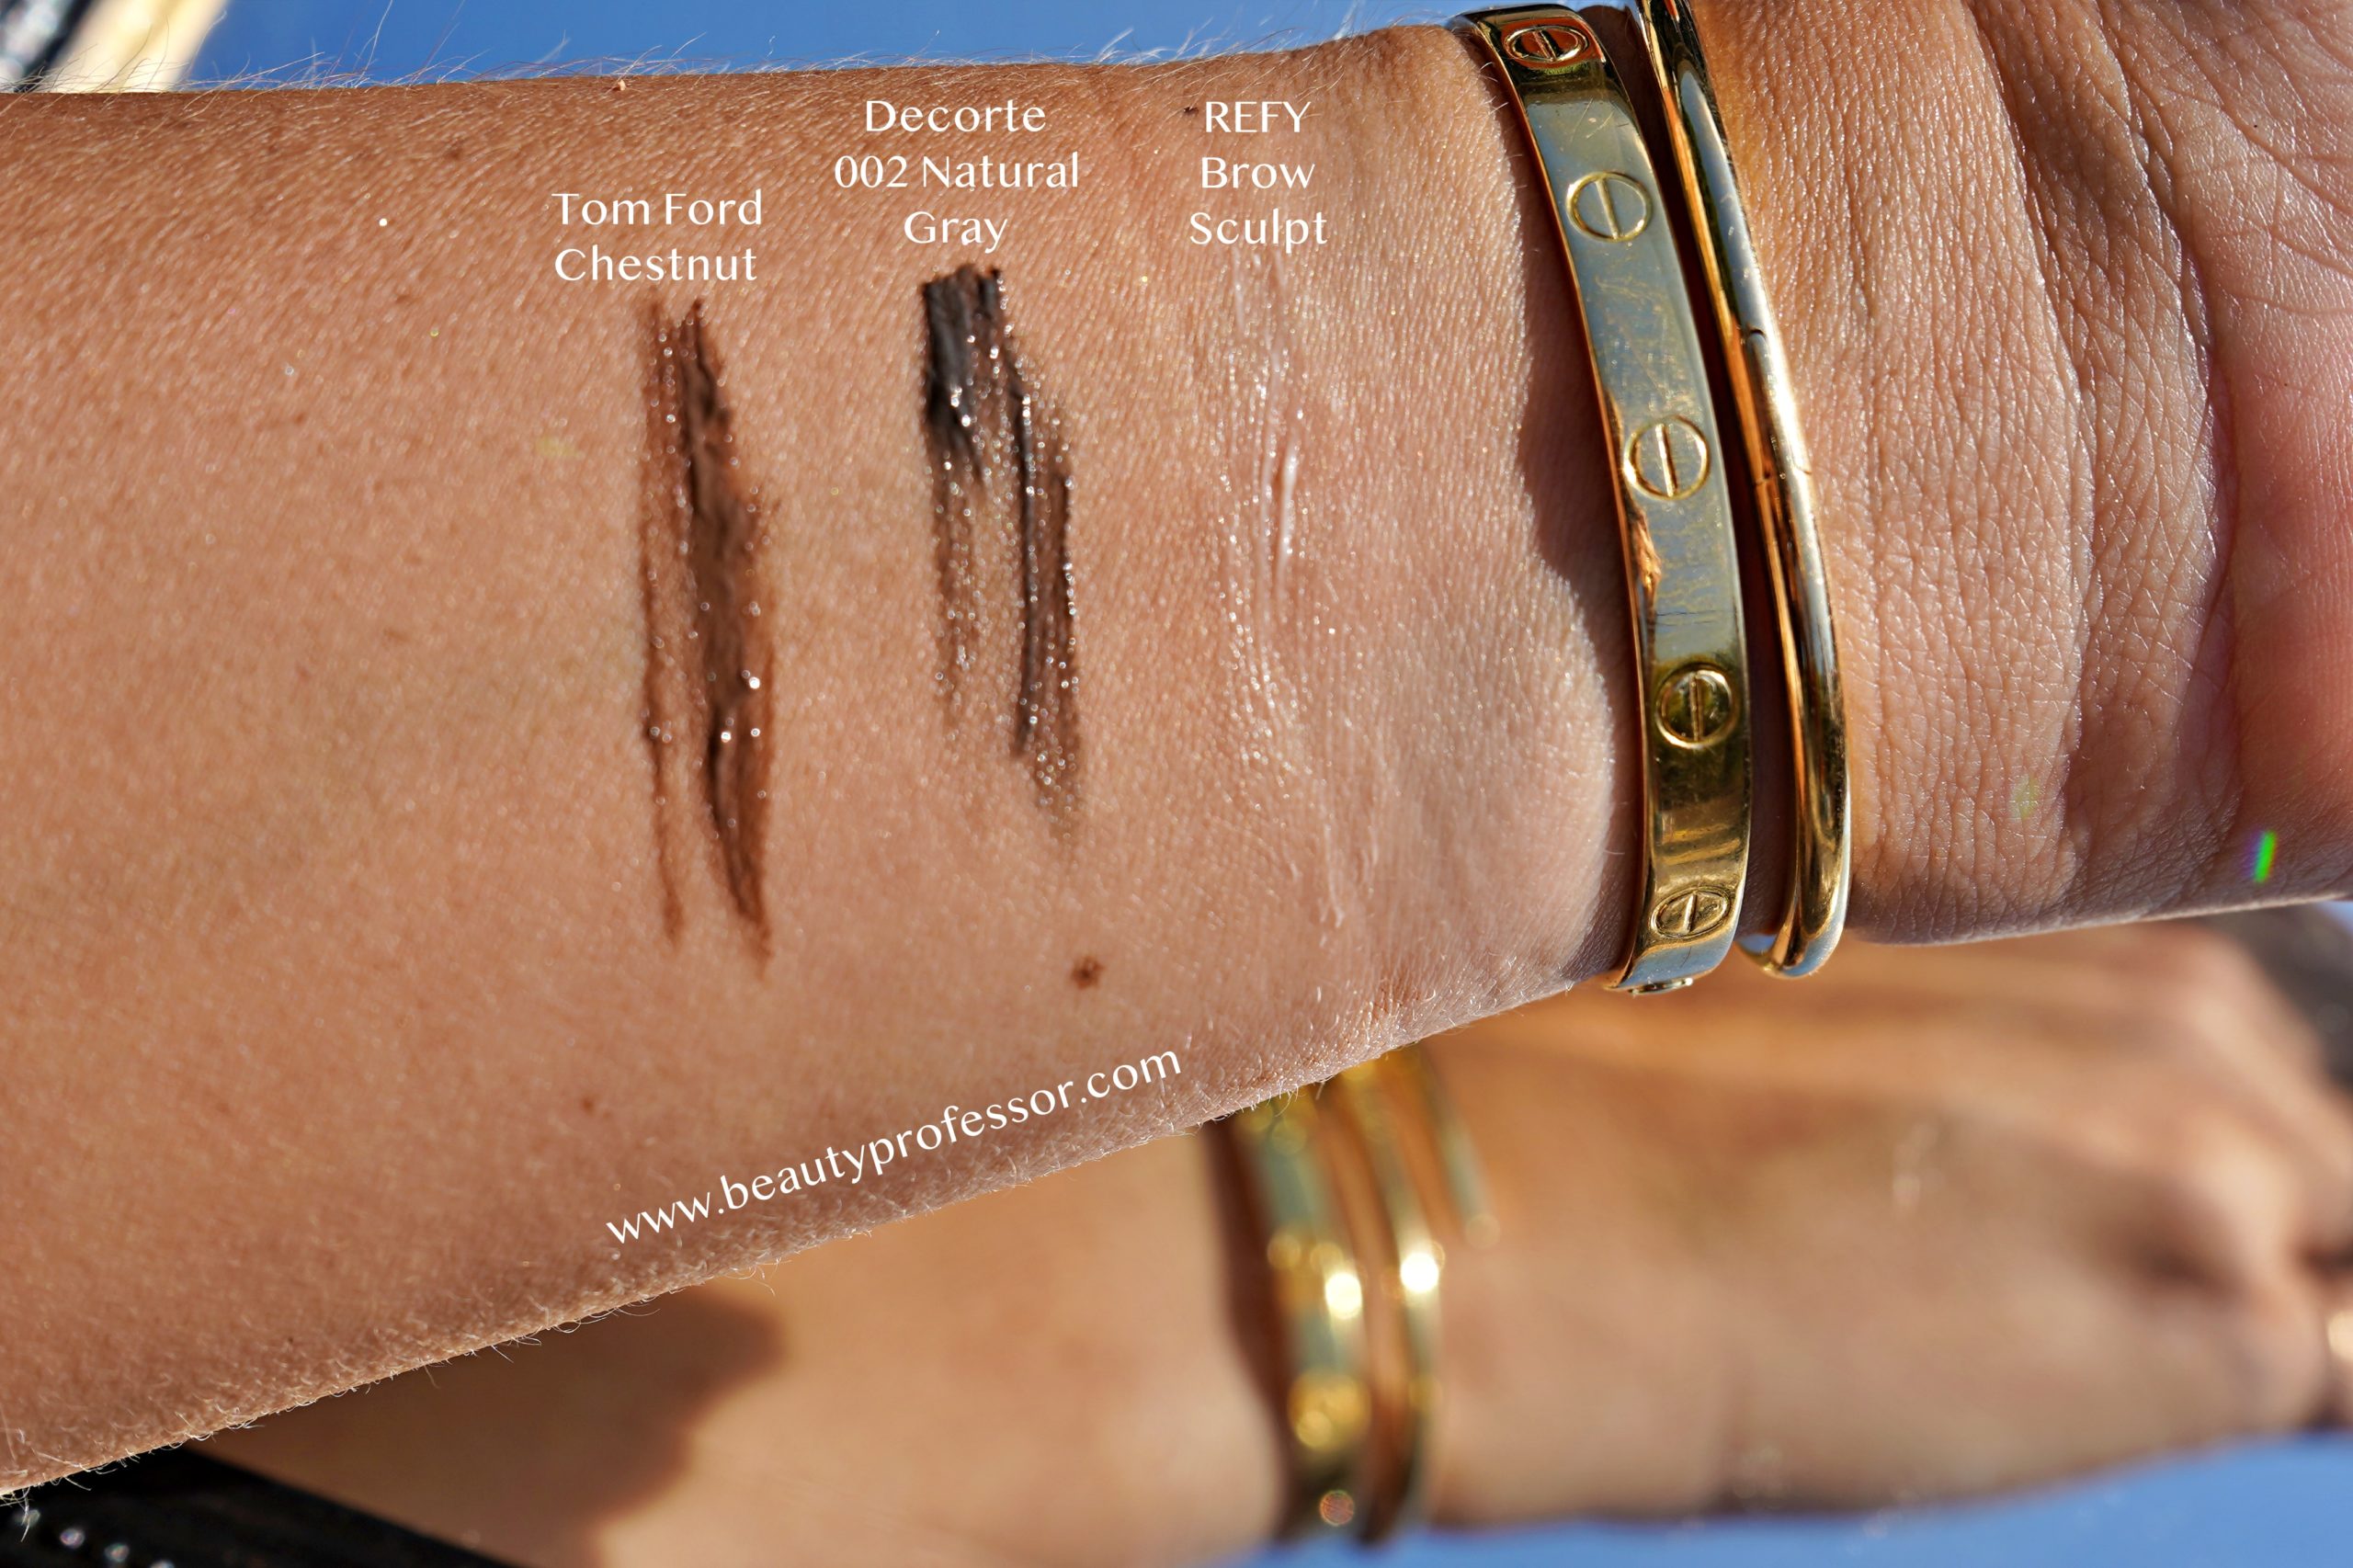 brow product swatches